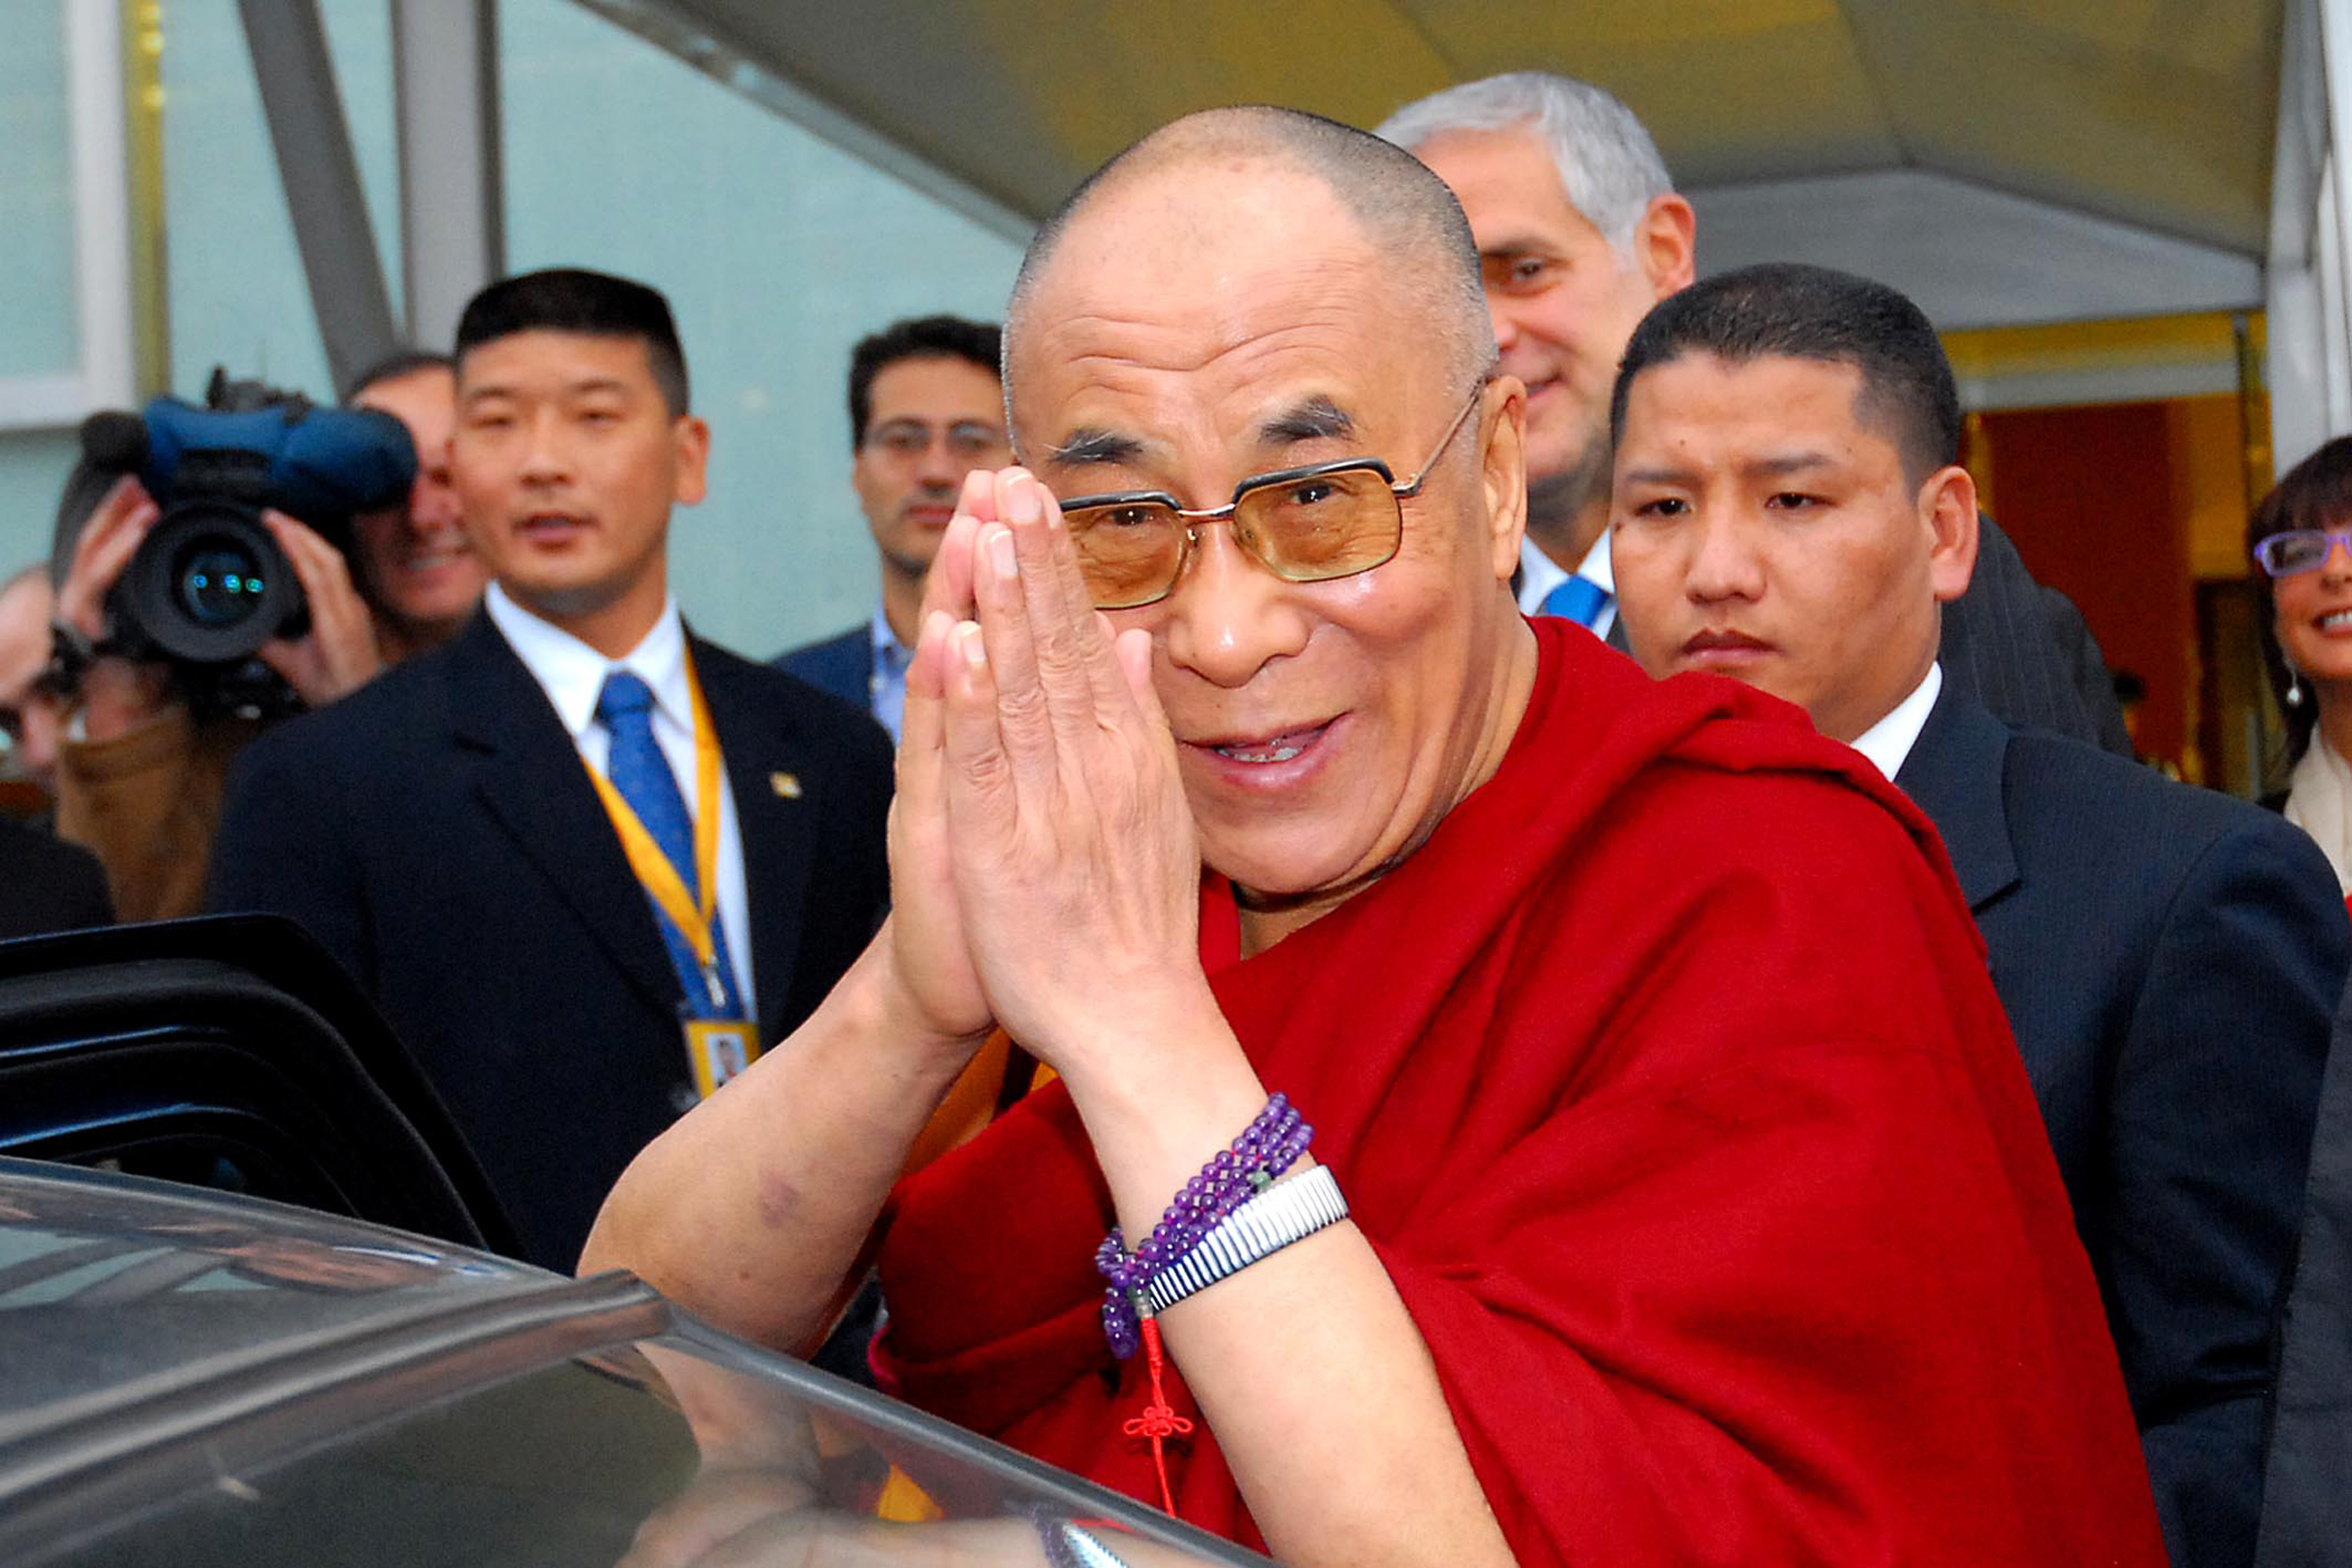 The Dalai Lama Issues Apology After Facing Backlash for Asking a Young Boy a Disturbing Question